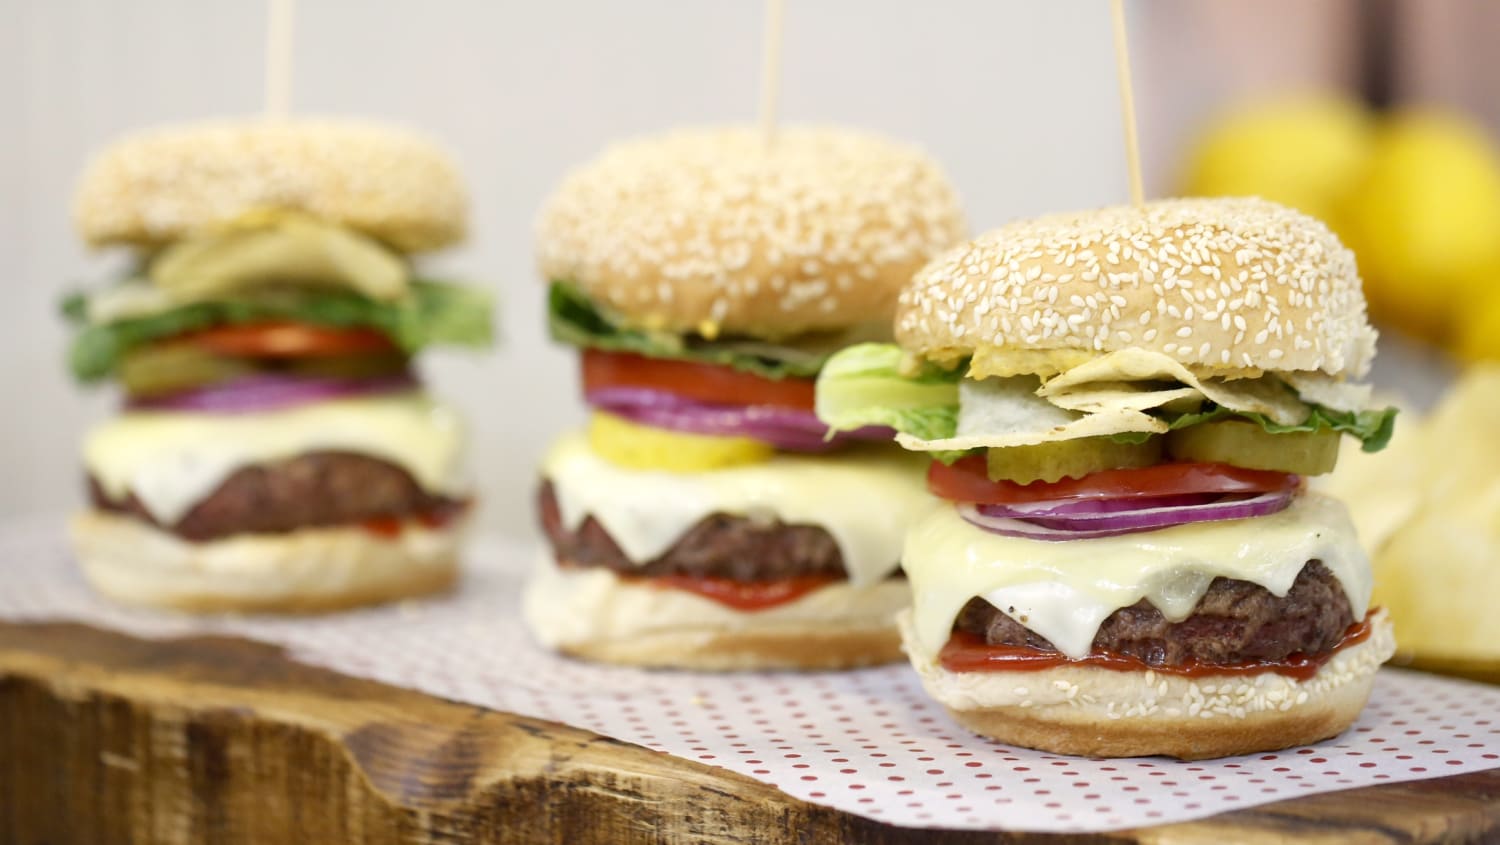 How To Grill Perfect Hamburgers - The Grilling Guide